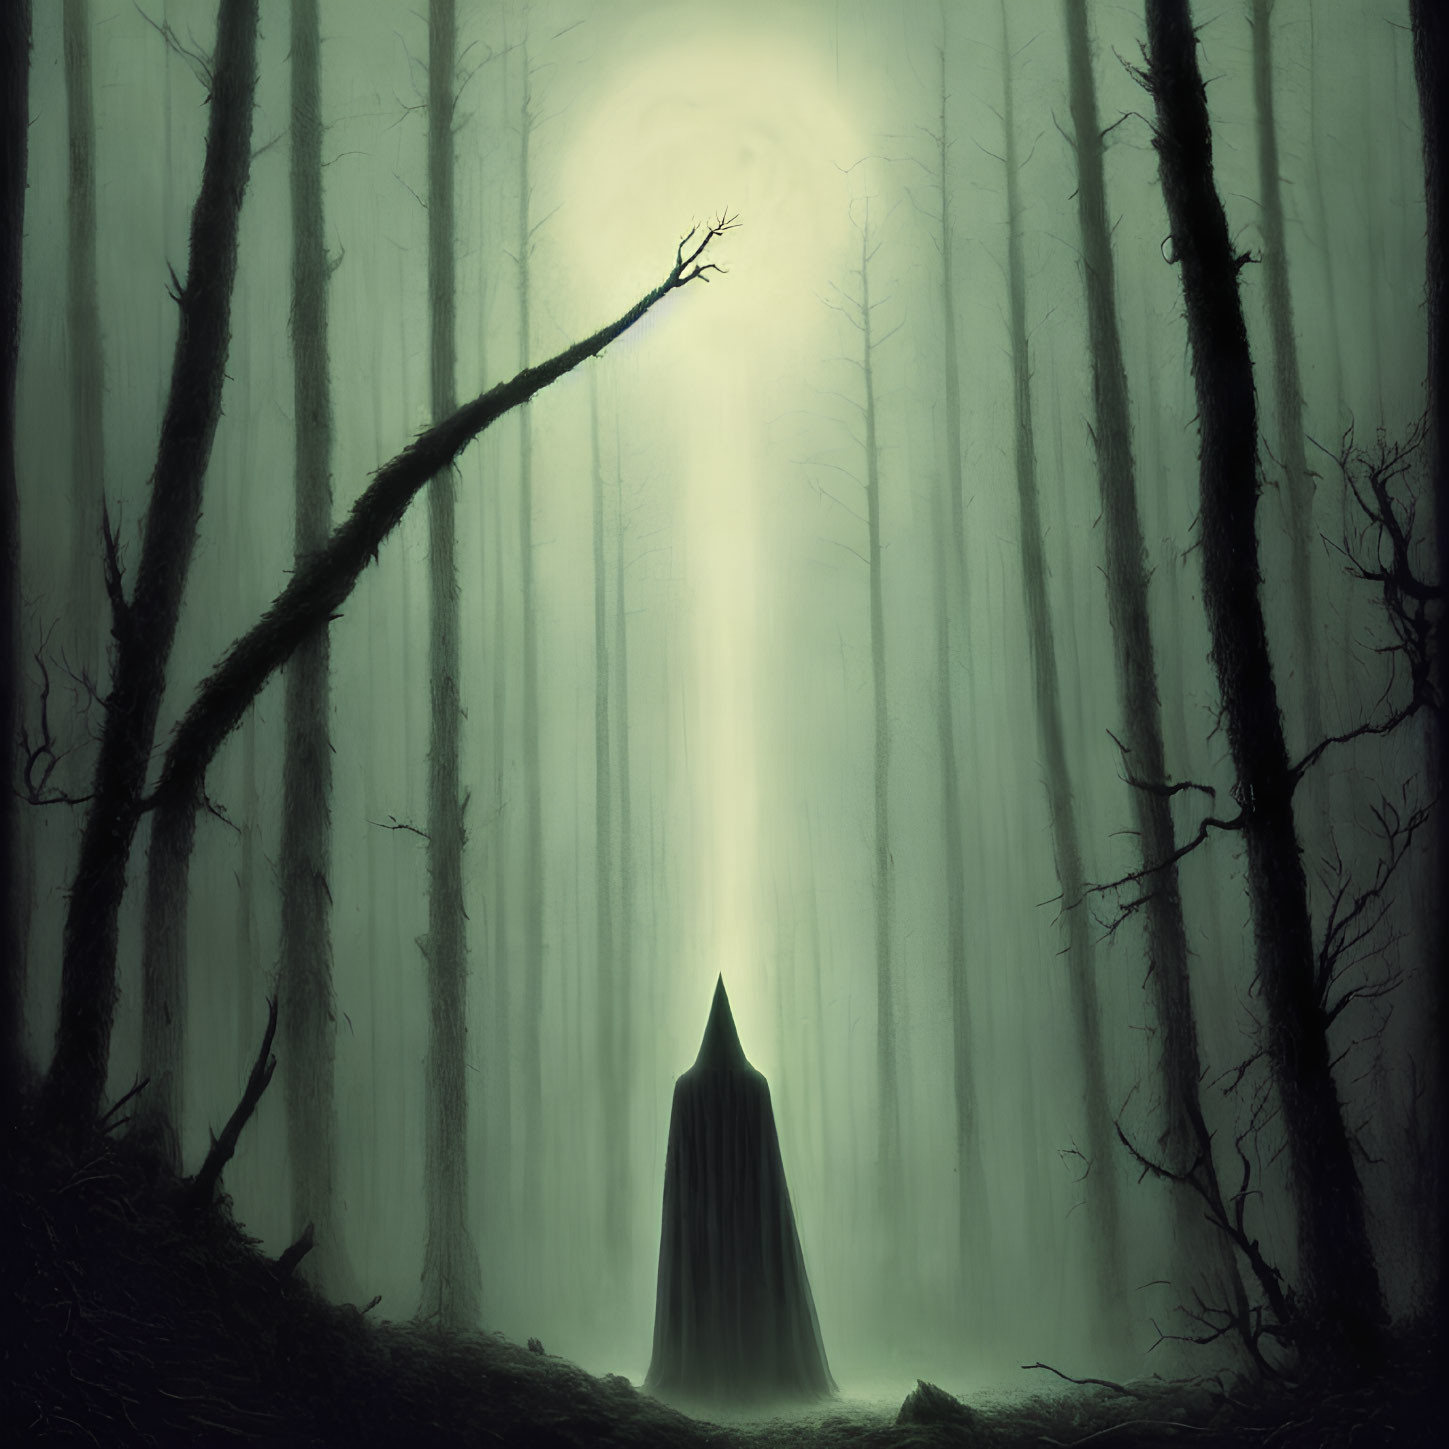 Misty forest scene with cloaked figure and beam of light